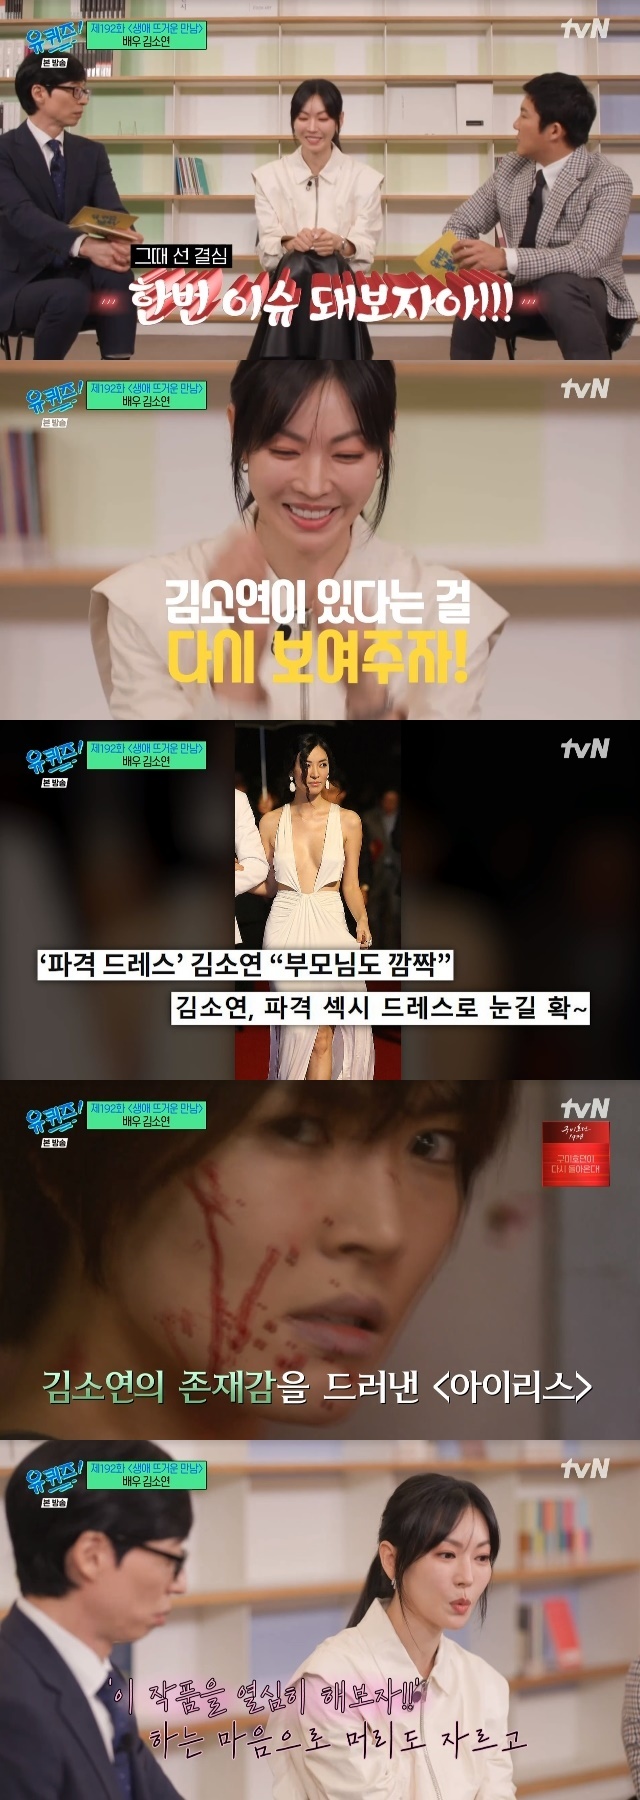 Actor Kim So-yeon unveiled the story of a cheap dress worn at the Busan International Film Festival.Actor Kim So-yeon appeared as a guest in the 192th episode of tvN entertainment show You Quiz on the Block (hereinafter referred to as You Quiz on the Block), which aired on May 3.On this day, Kim So-yeon confessed that he once became an actor who was not looking for anyone. He came to the moment when he did everything on Eve, did a few more works, and was poor at 24 or 25 years old.I thought that it would be a flower age, but I thought that luck would continue, and I thought, Why do not I keep casting?I was dreaming of recovering by asking the company to audition. Kim So-yeon said, The short film shot in the blank period was invited to the Busan International Film Festival and stepped on the red carpet. He also revealed an anecdote about it. I decided to make a dress pretty well because it was a long time official appearance.Kim So-yeon said, I showed a picture, but the dress was too bold. Then I said, Lets have an issue, and I boldly tried it on, saying, Lets show Kim So-yeon again.Since then, Kim So-yeon has succeeded in attracting attention as an extraordinary sexy dress.Yoo Jae-seok also mentioned that Kim So-yeon was a series of surprises at the time, and that he cut off his trademark long straight hair. Kim So-yeon said, I went to the Busan International Film Festival and immediately cast it on Iris.When I went through such a time, I realized how precious and grateful it was to have a cast. I tried hard to practice this work because I thought I had to cut my hair and have muscles because I was an operative.